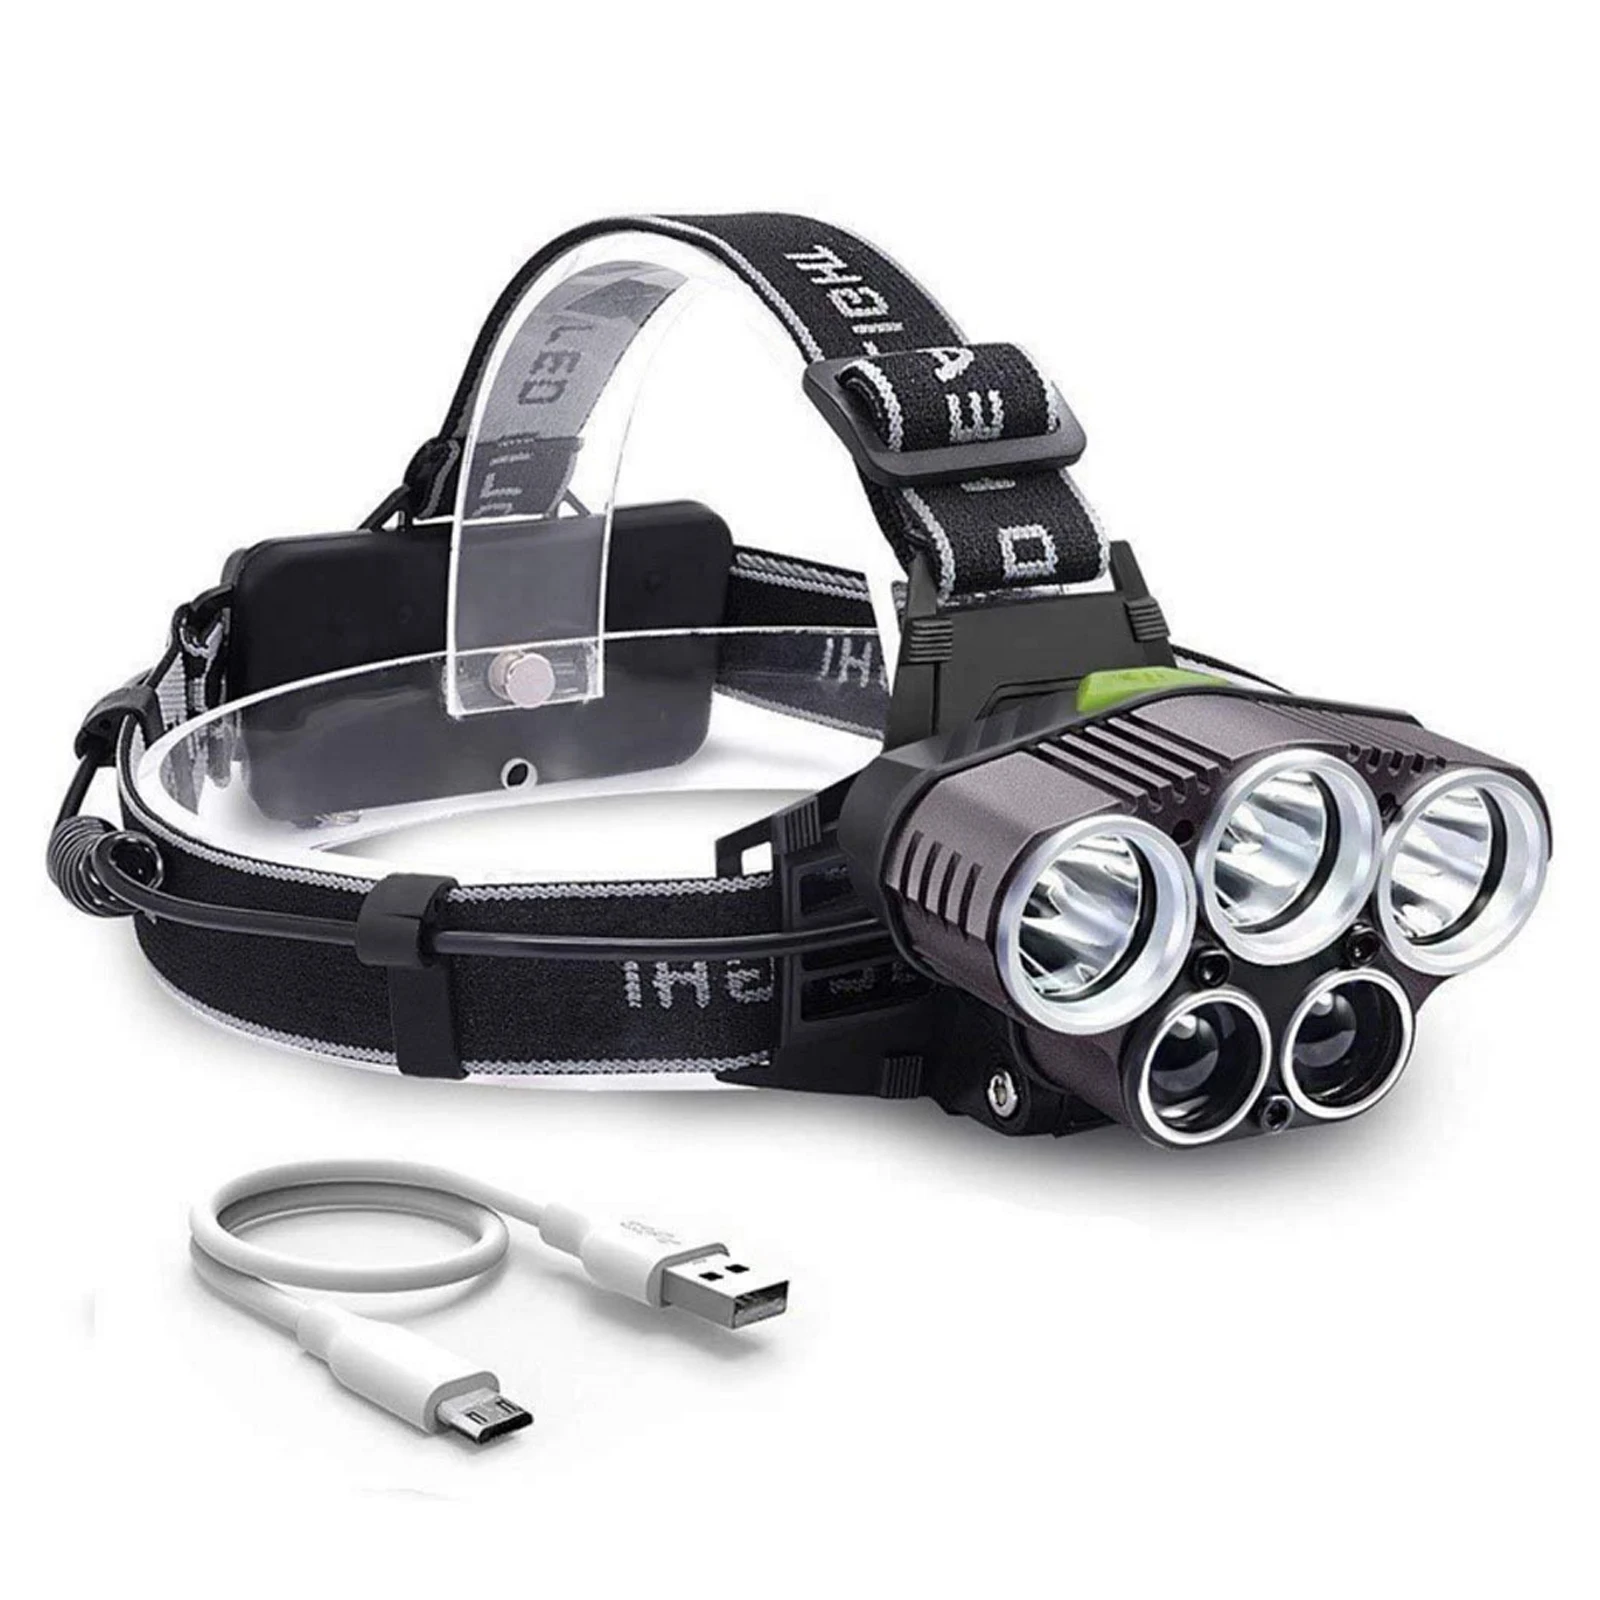 Rechargeable Zoom Led Headlamp Fishing Headlight Torch Hunting Head Lamp Camping Headlamp Flashlight Head Light Fishing Goods  - buy with discount